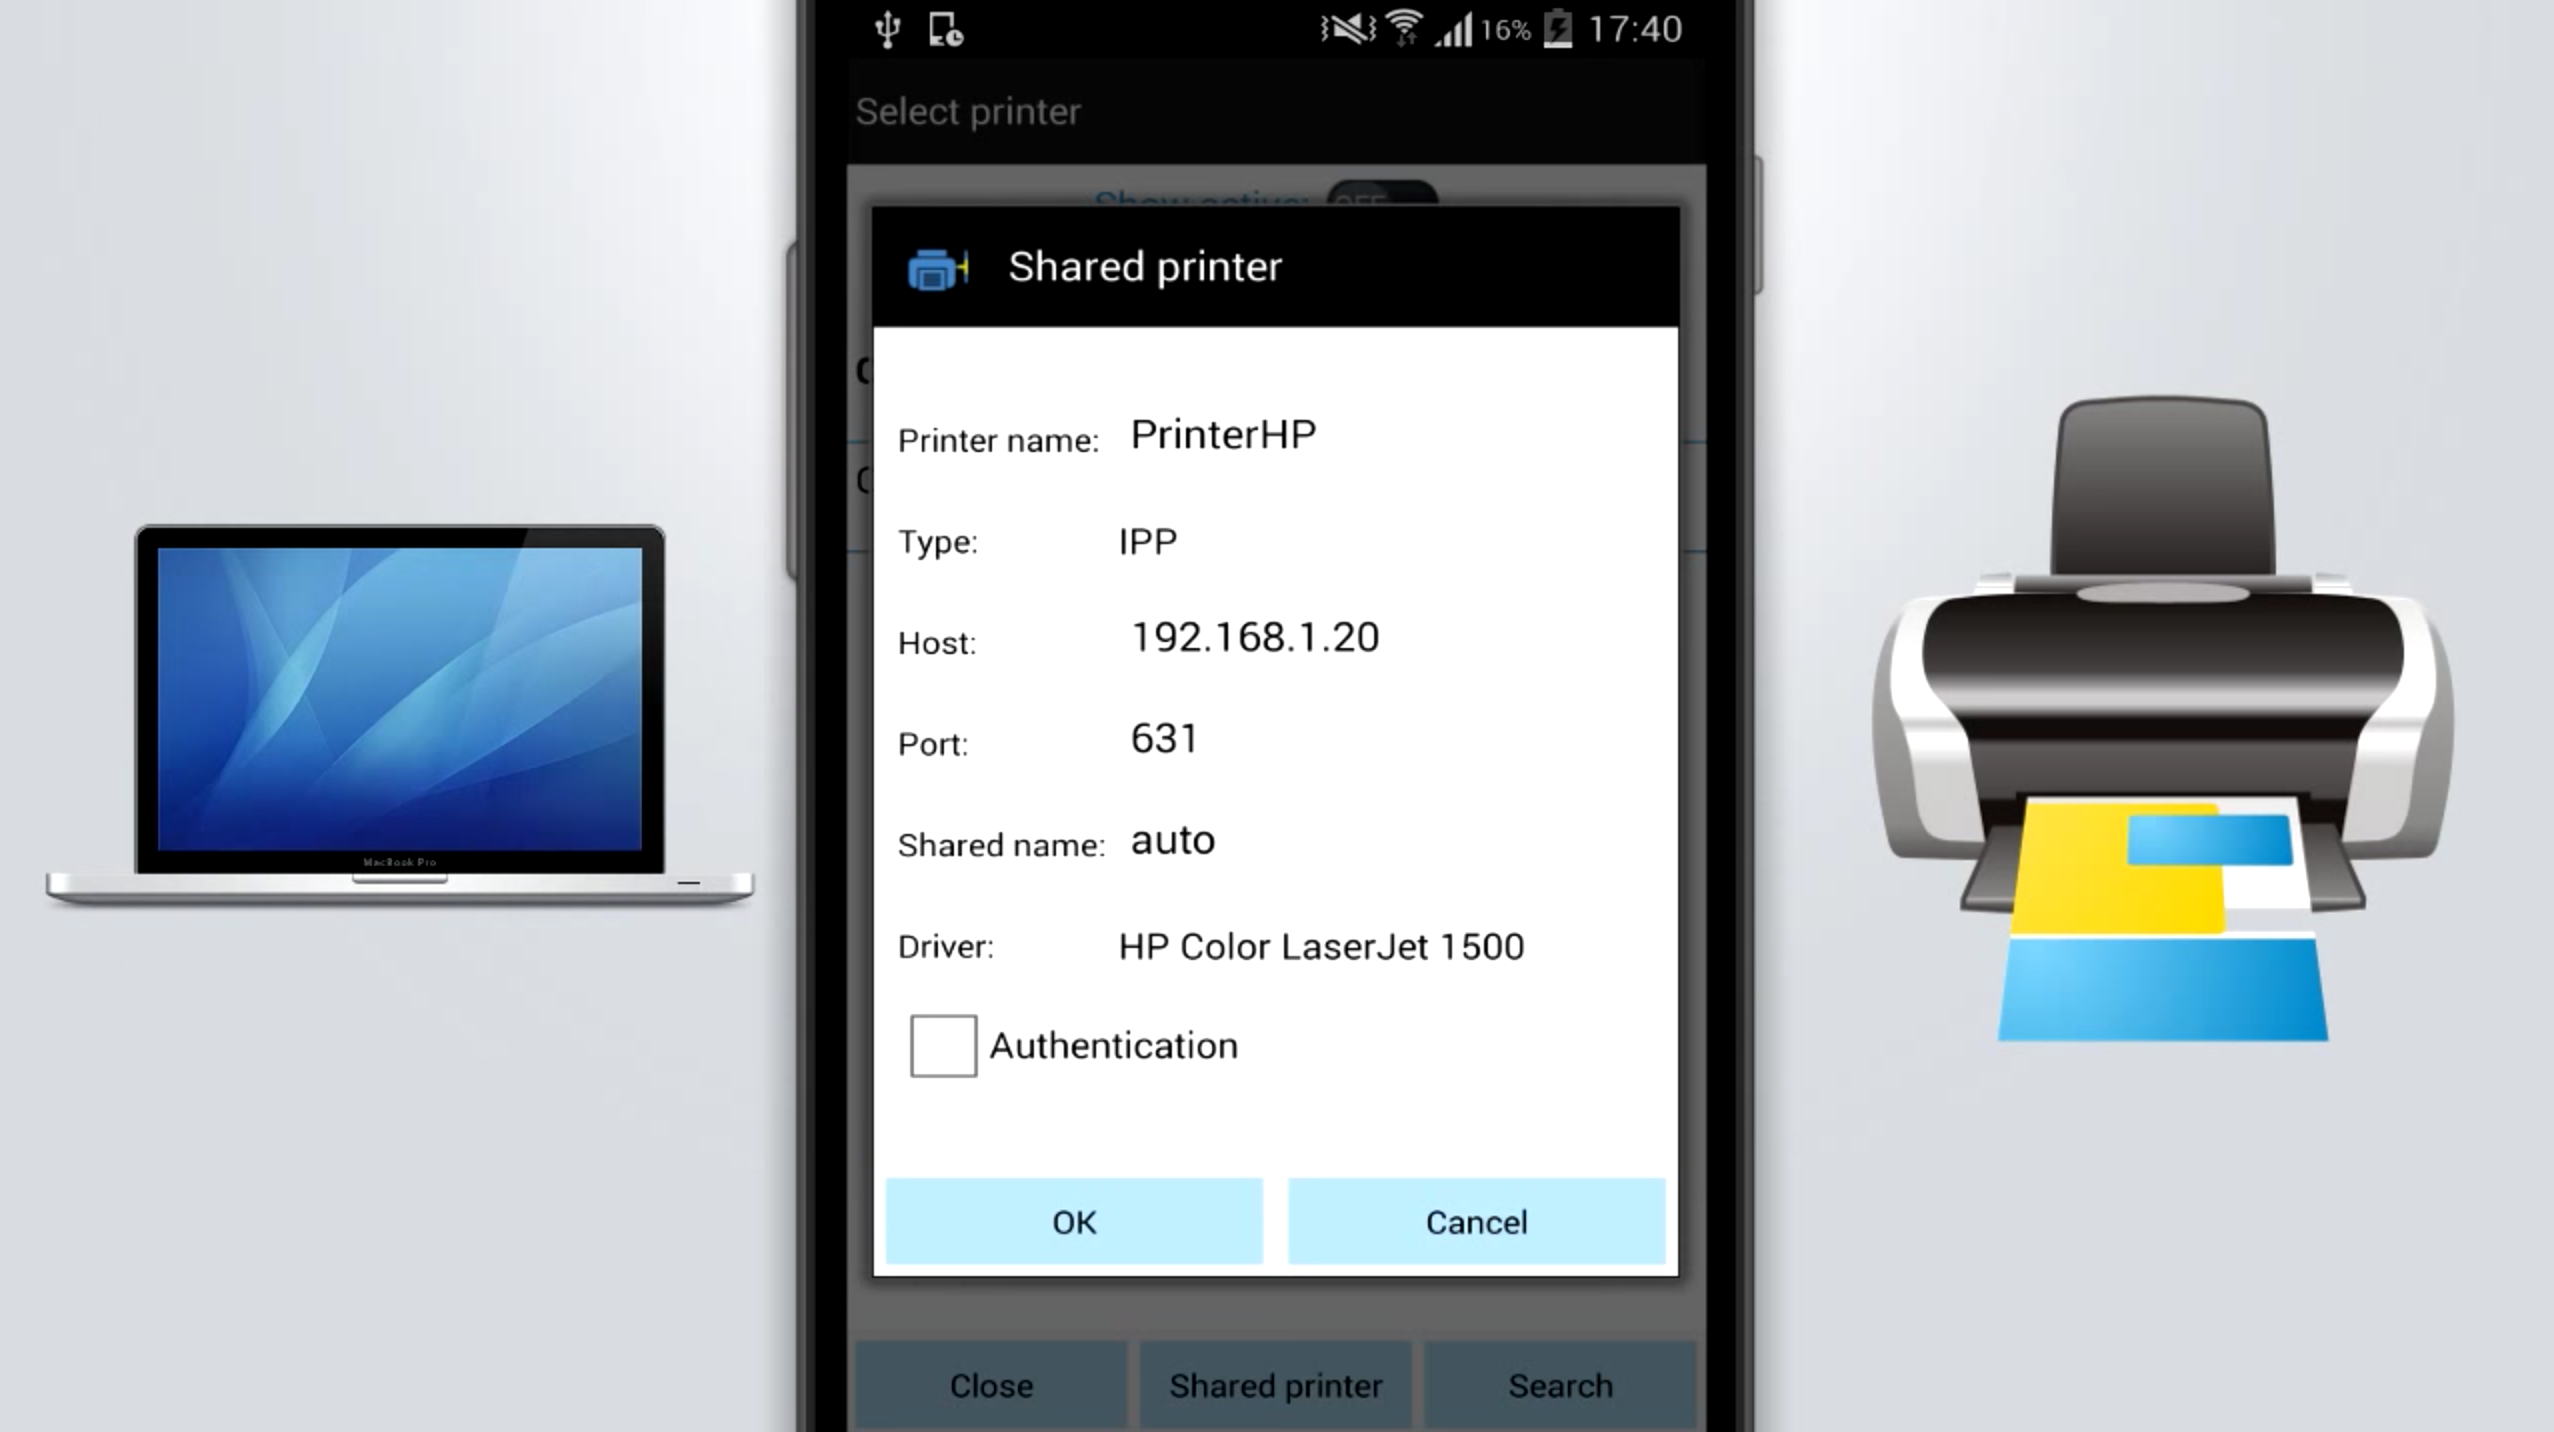 epson printer drivers for android